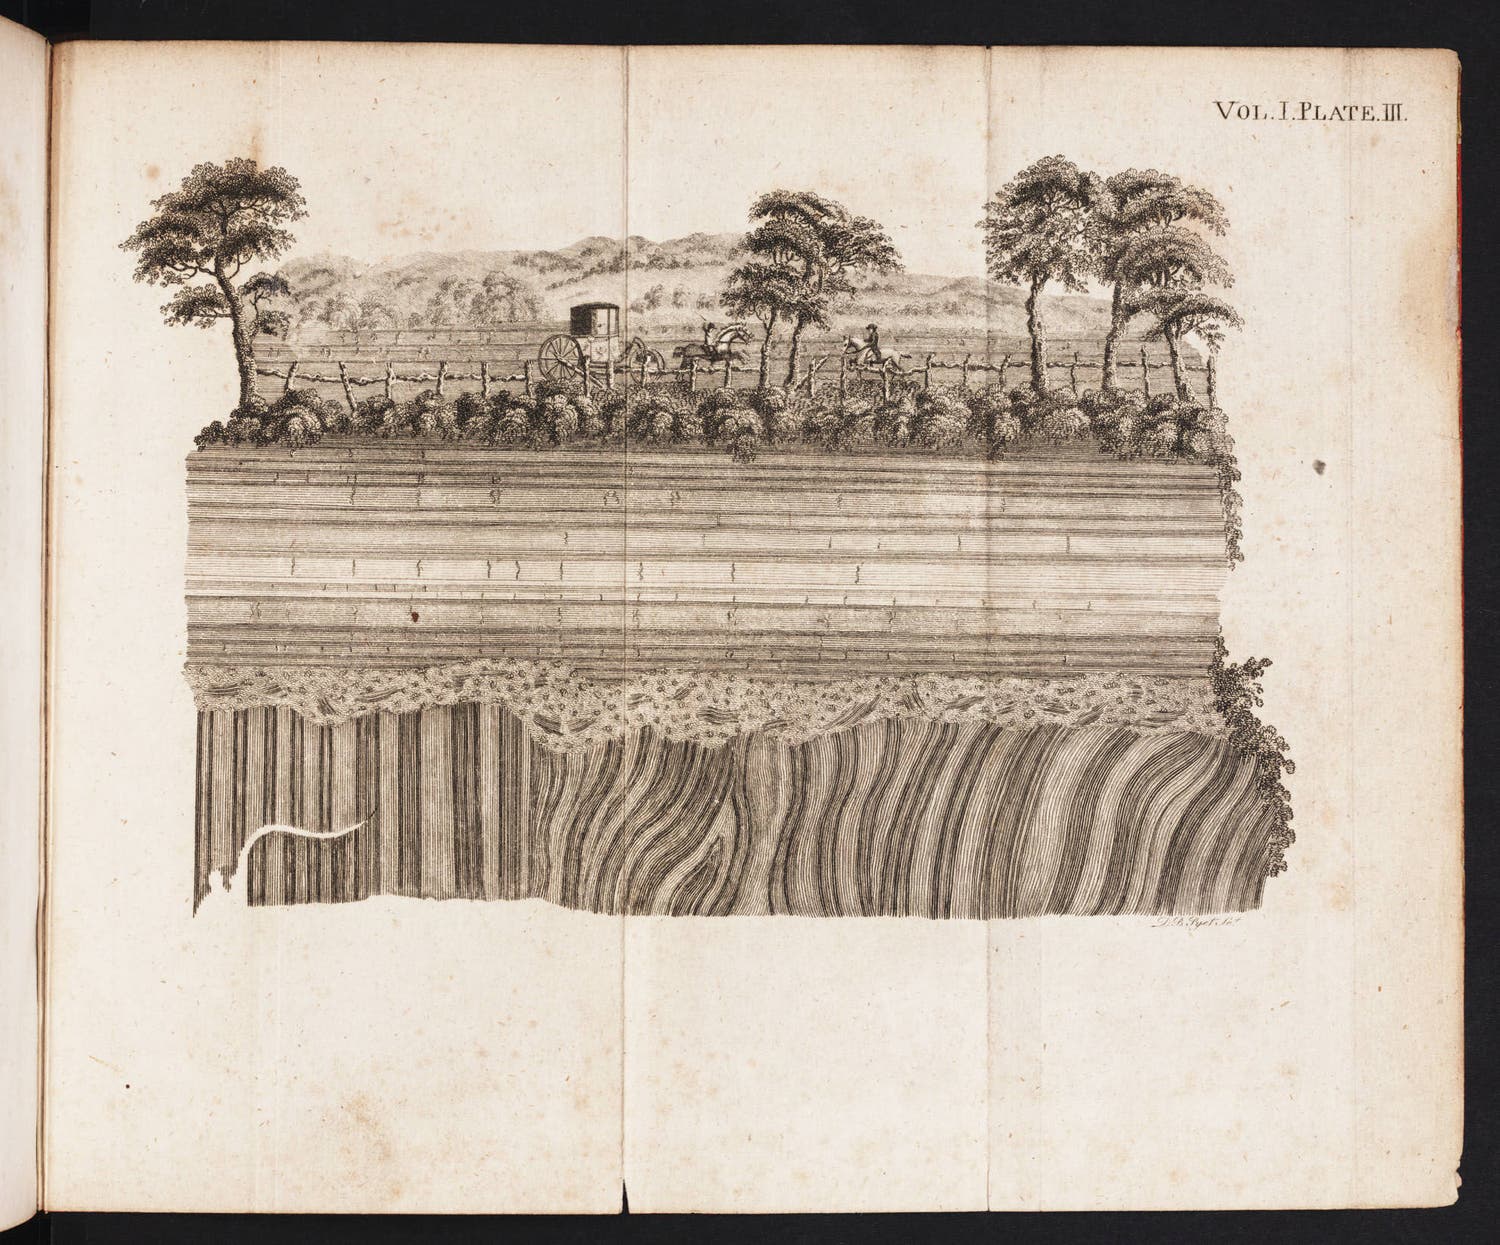 Unconformity at Jedburgh, engraving, James Hutton, Theory of the Earth, 1795 (Linda Hall Library)